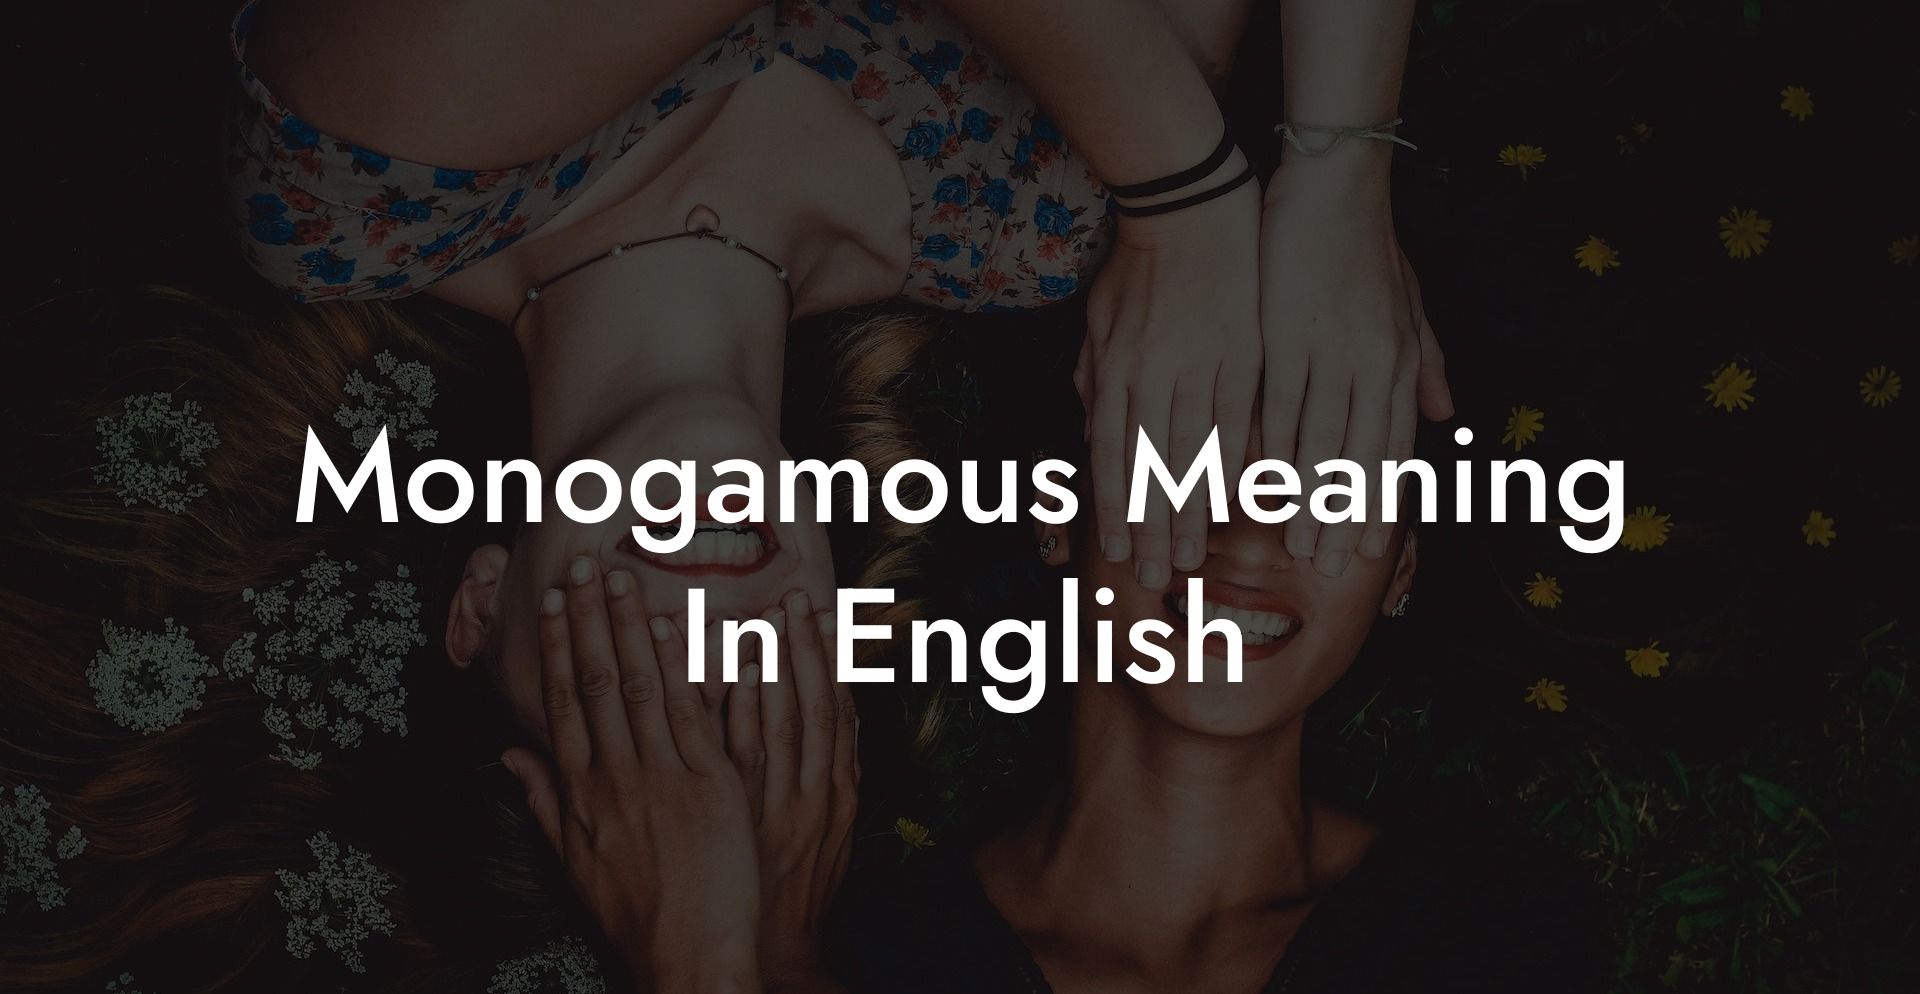 Monogamous Meaning In English